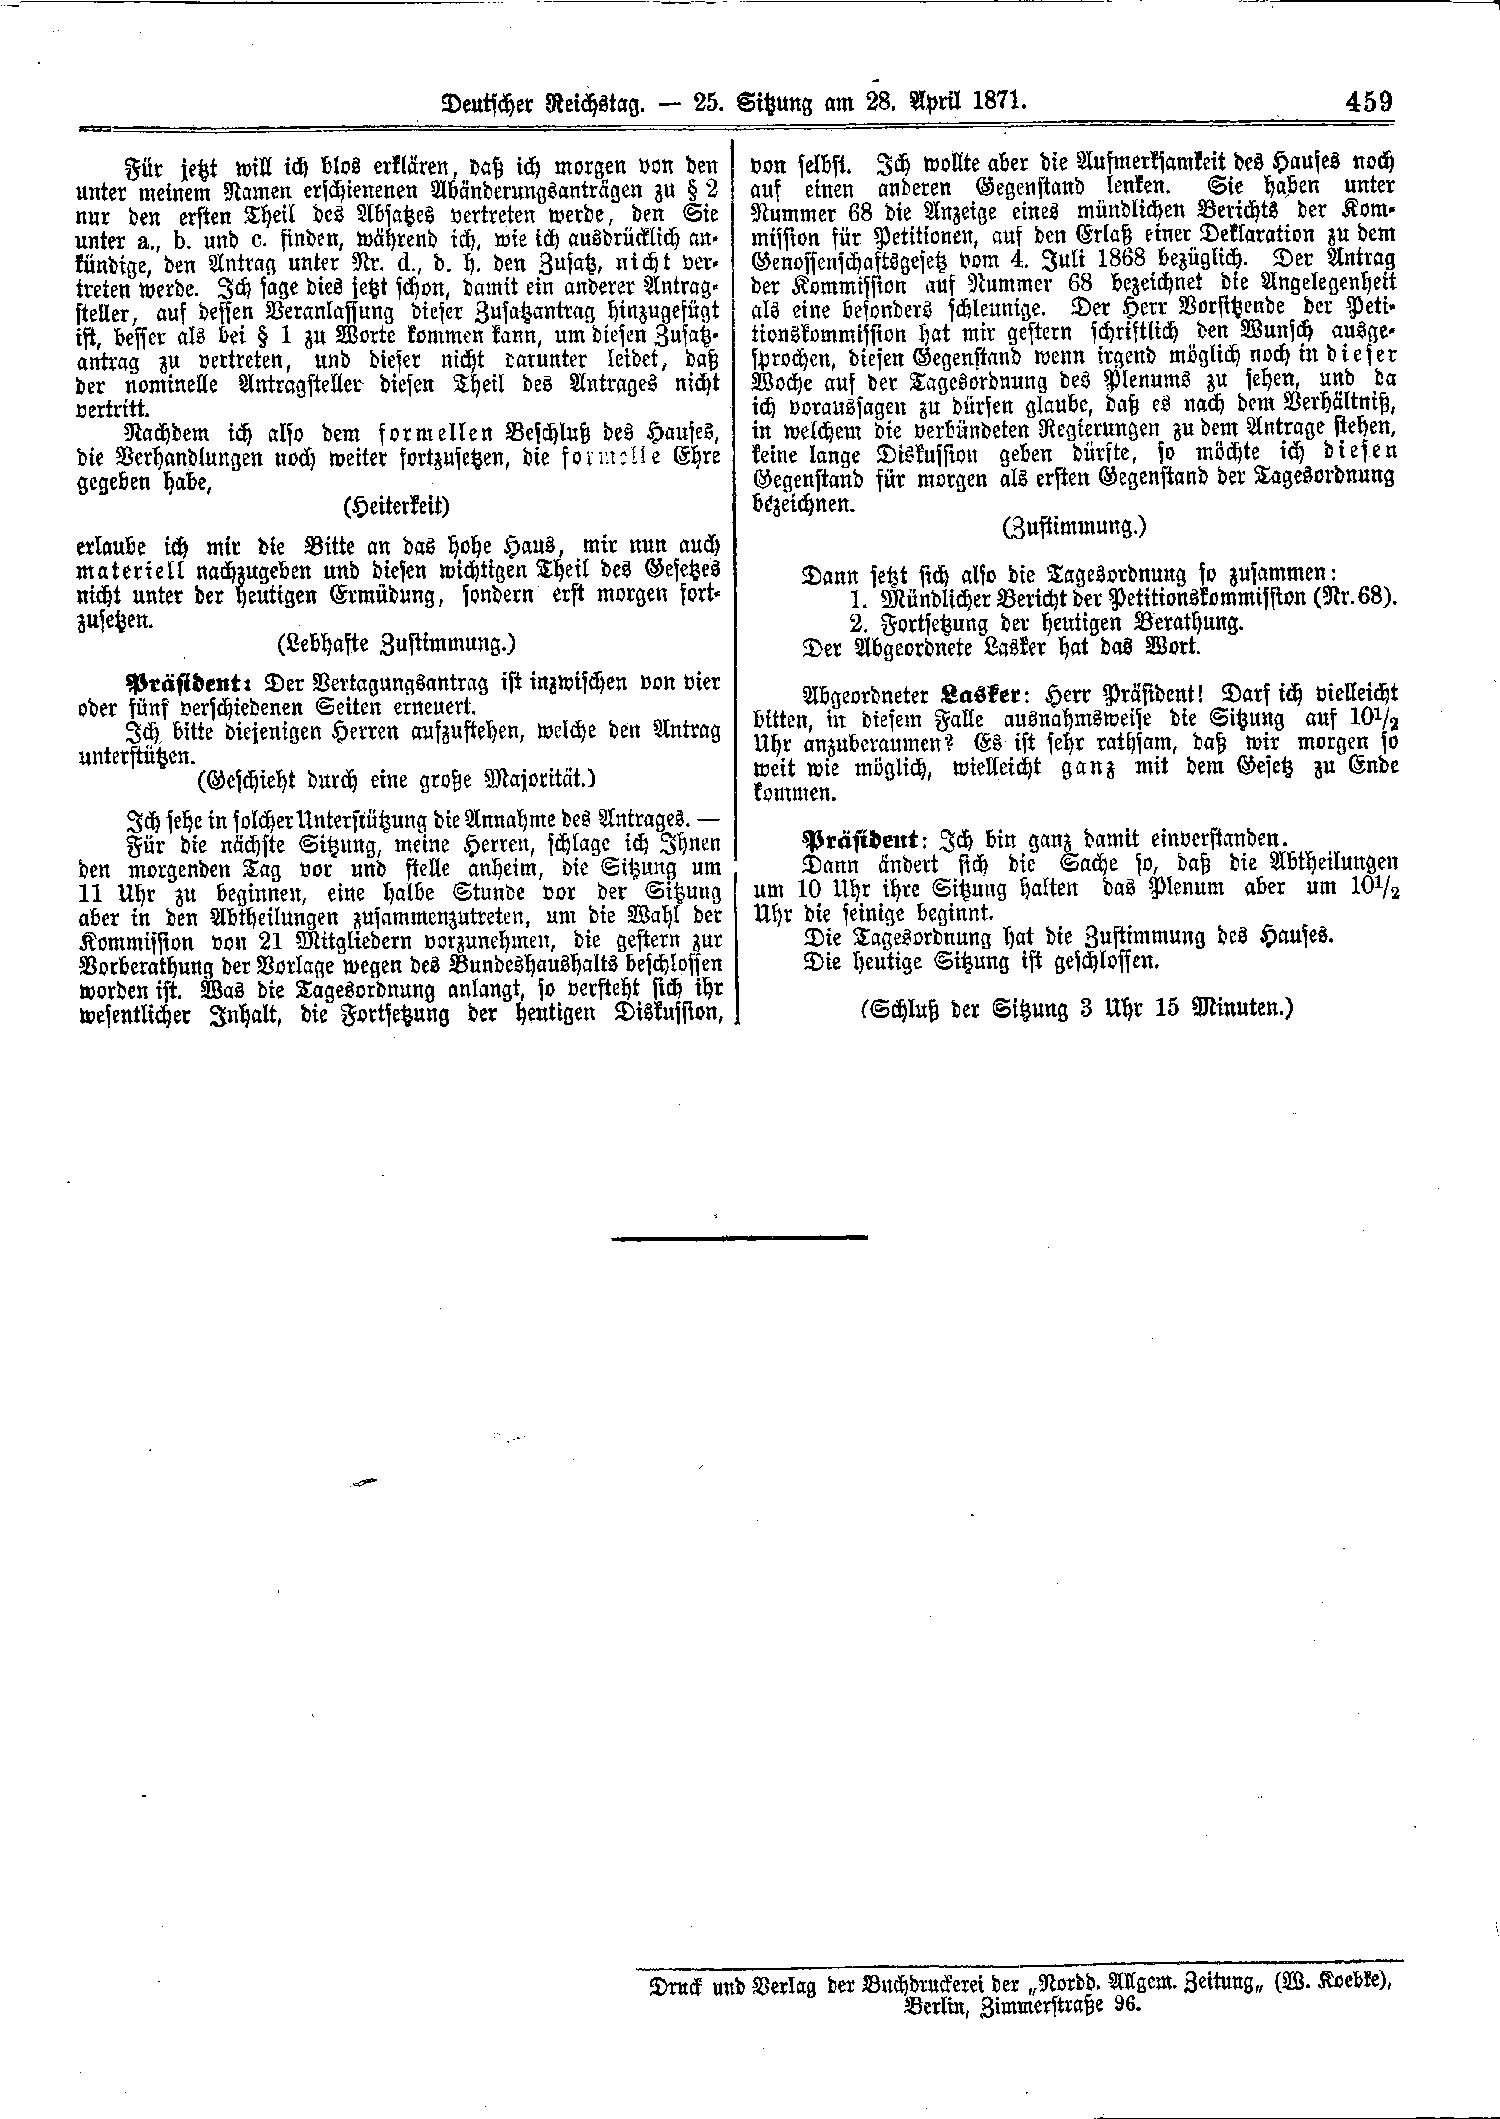 Scan of page 459